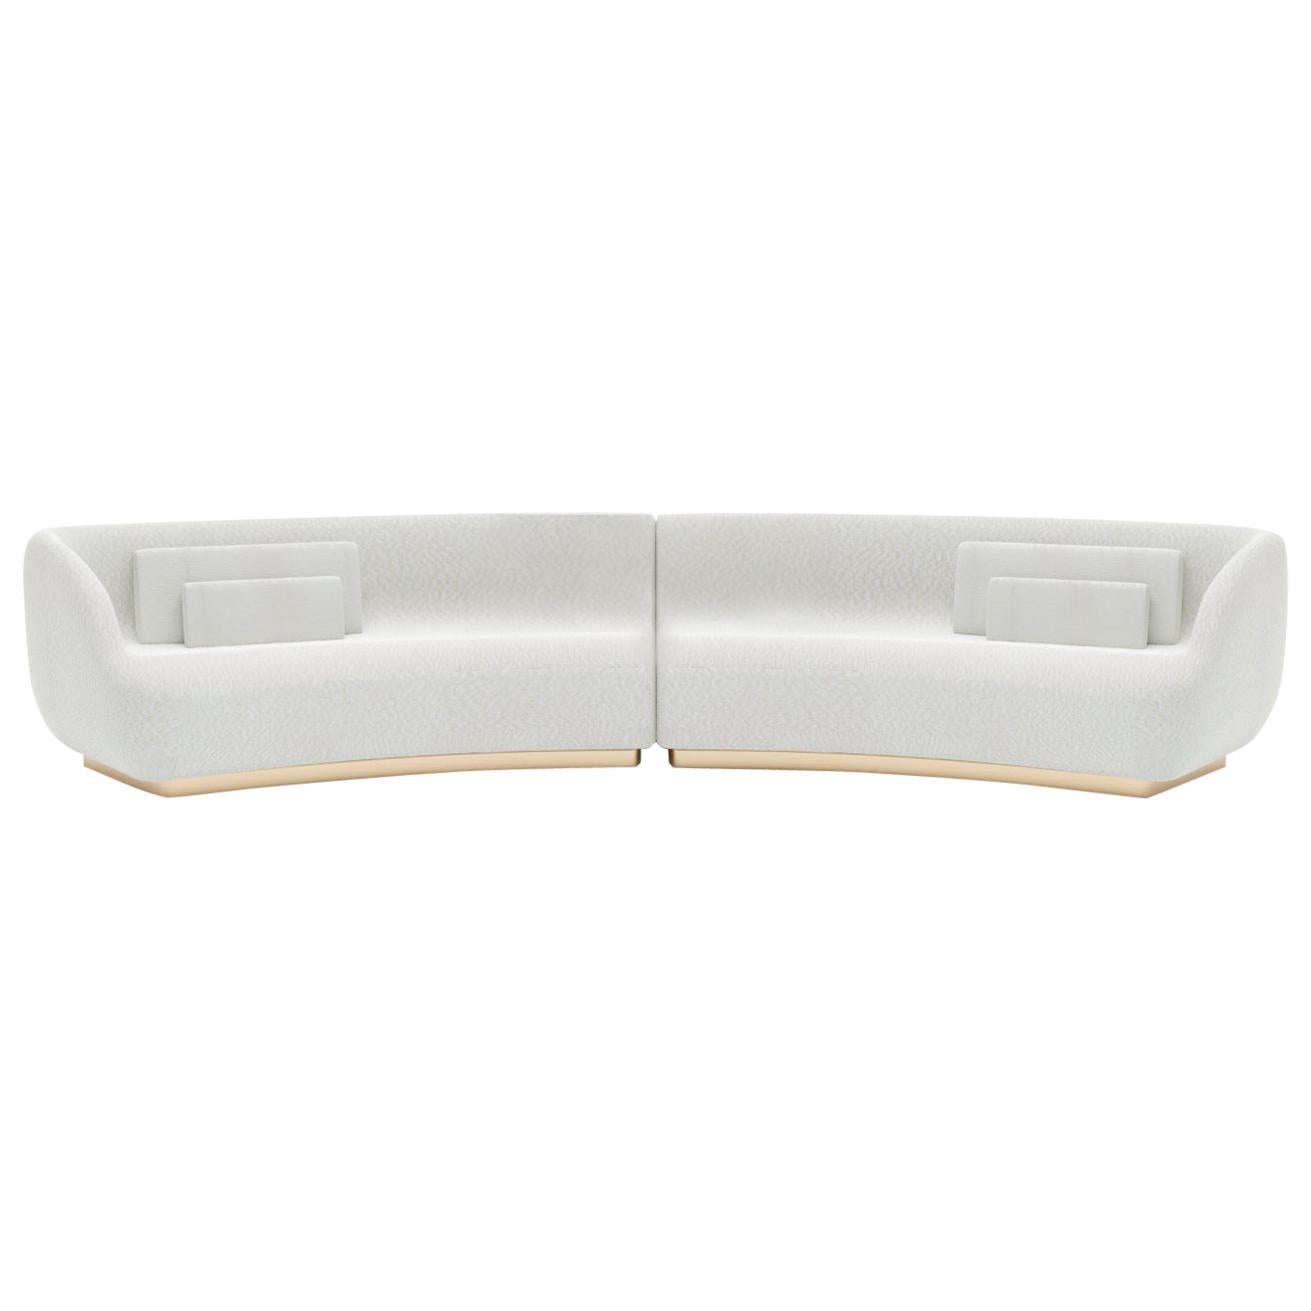 Demi-Lune, 21st Century Curved Design Dual Element Low Couch